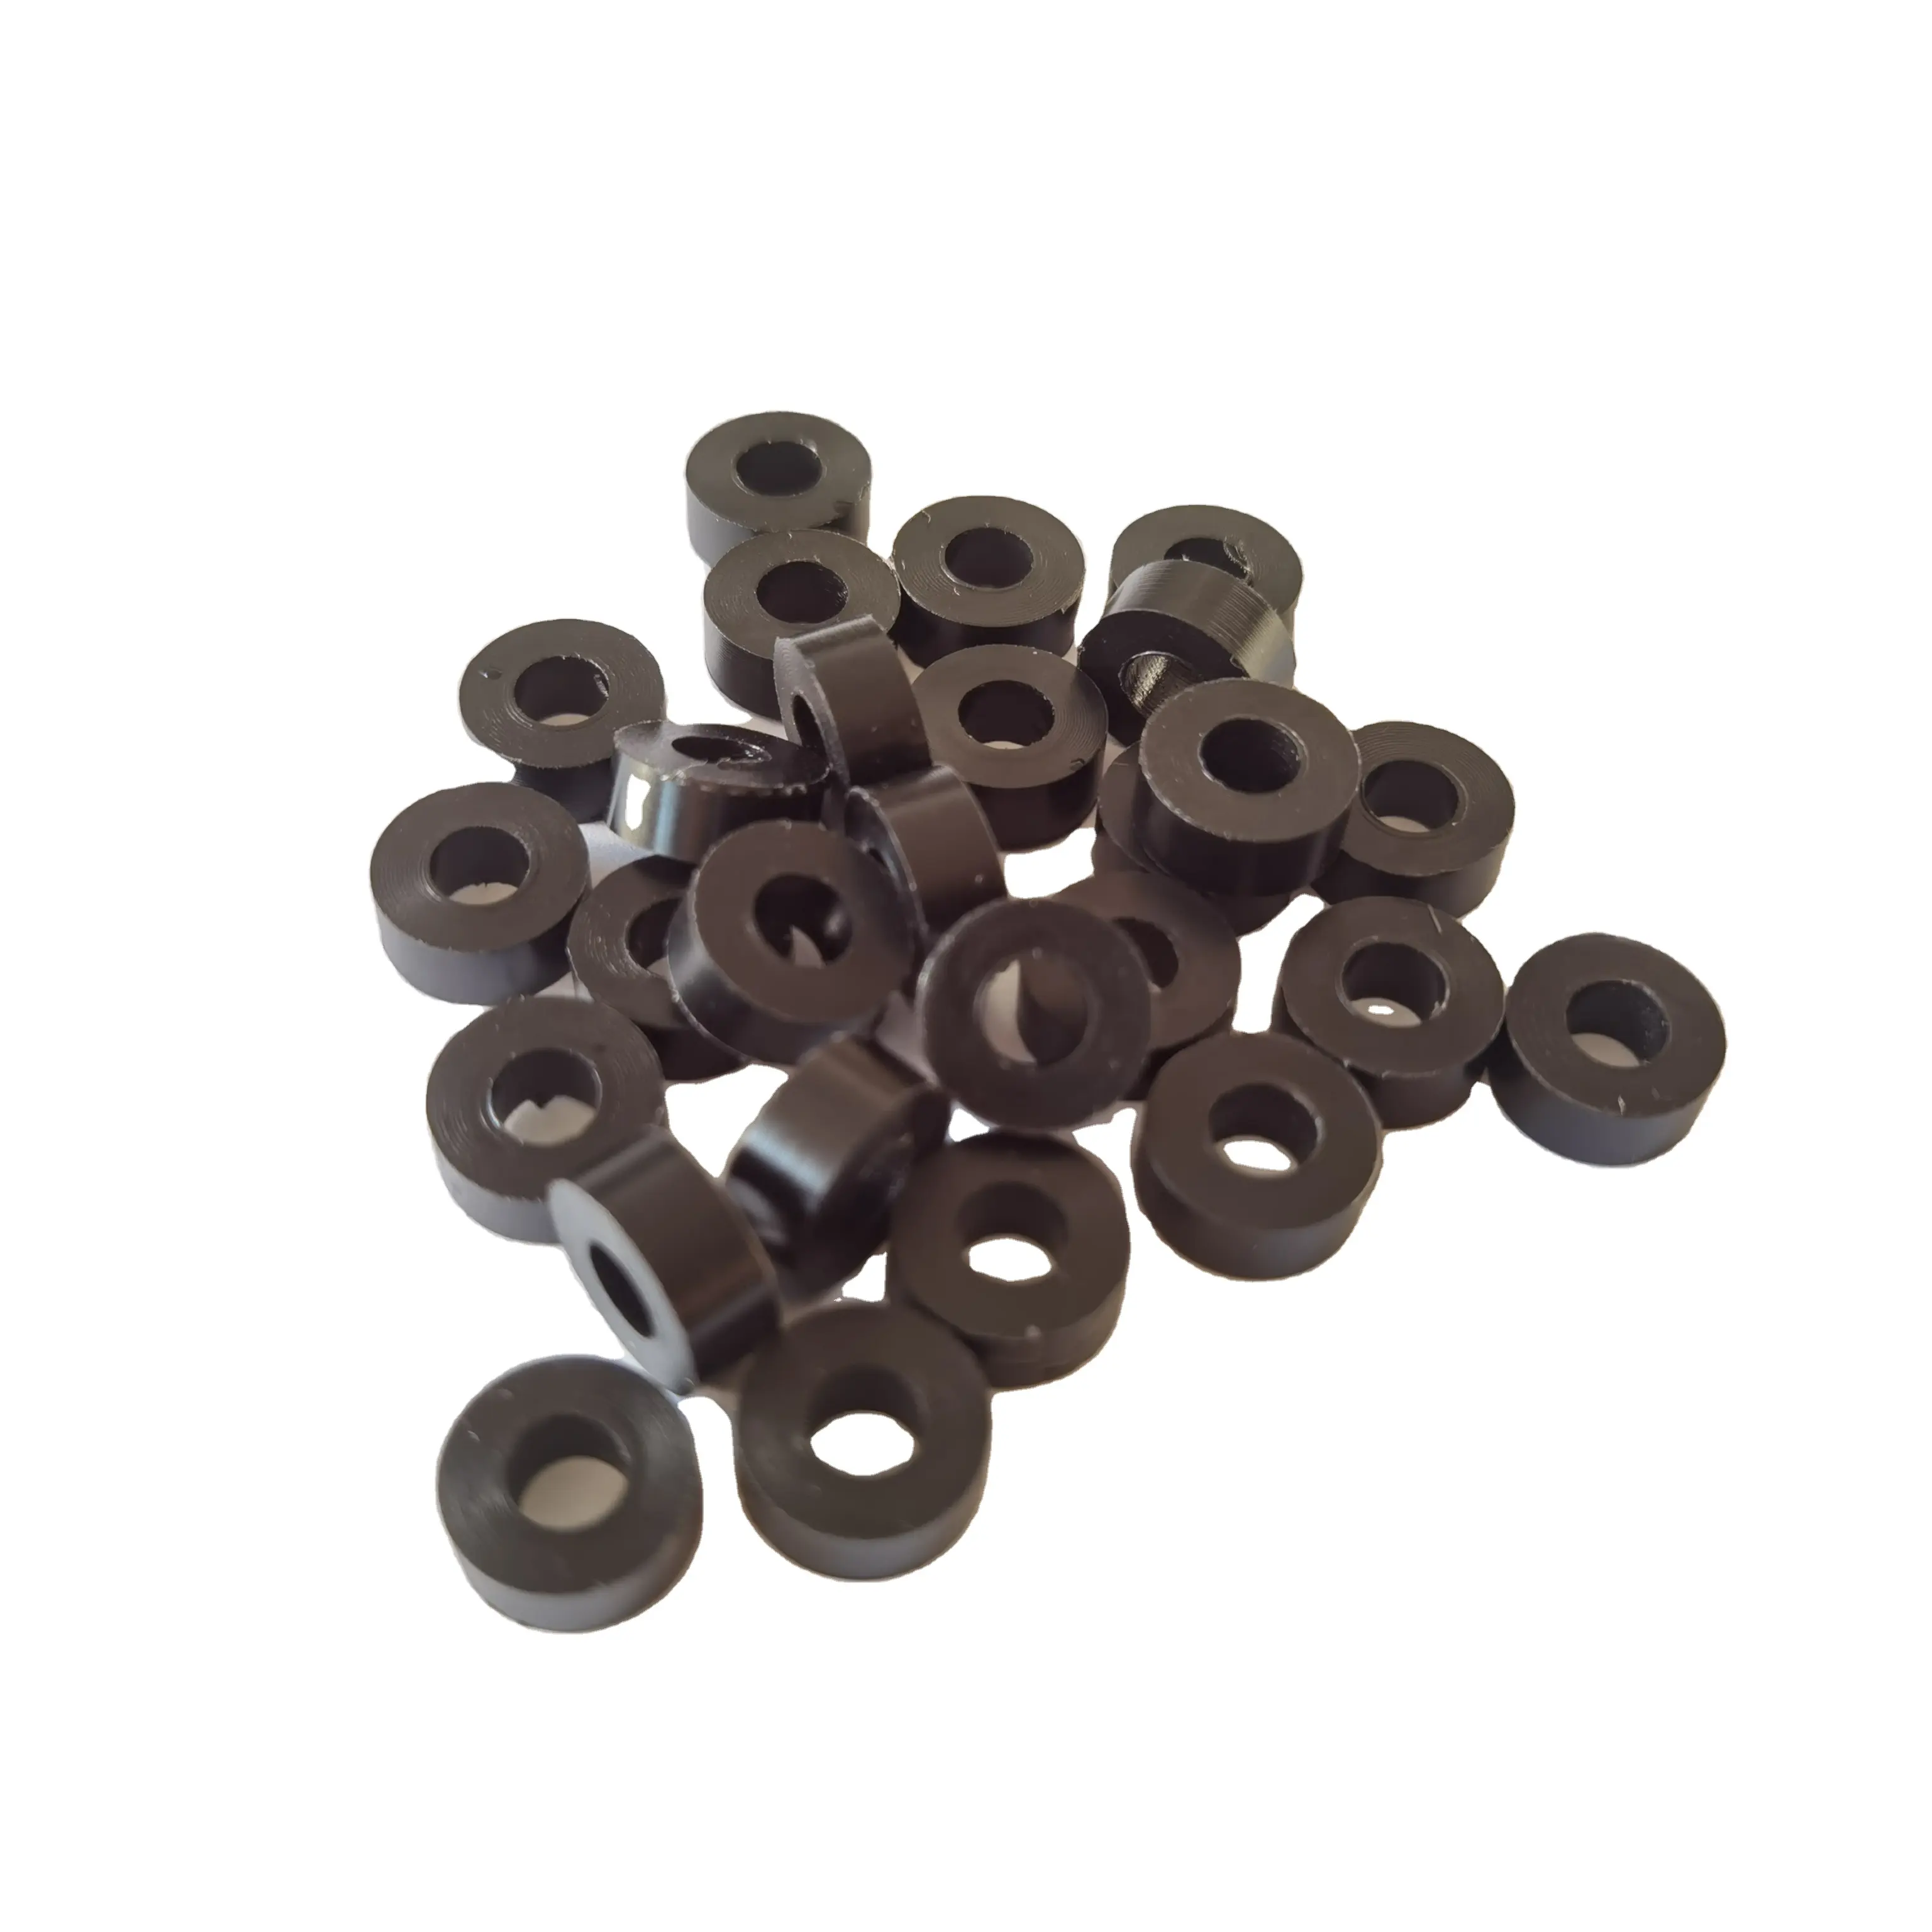 M5 M6 M8 M10 M14 Black plastic insulation flat washer heat protected nylon shim waterproof spacer thickened gasket in stock